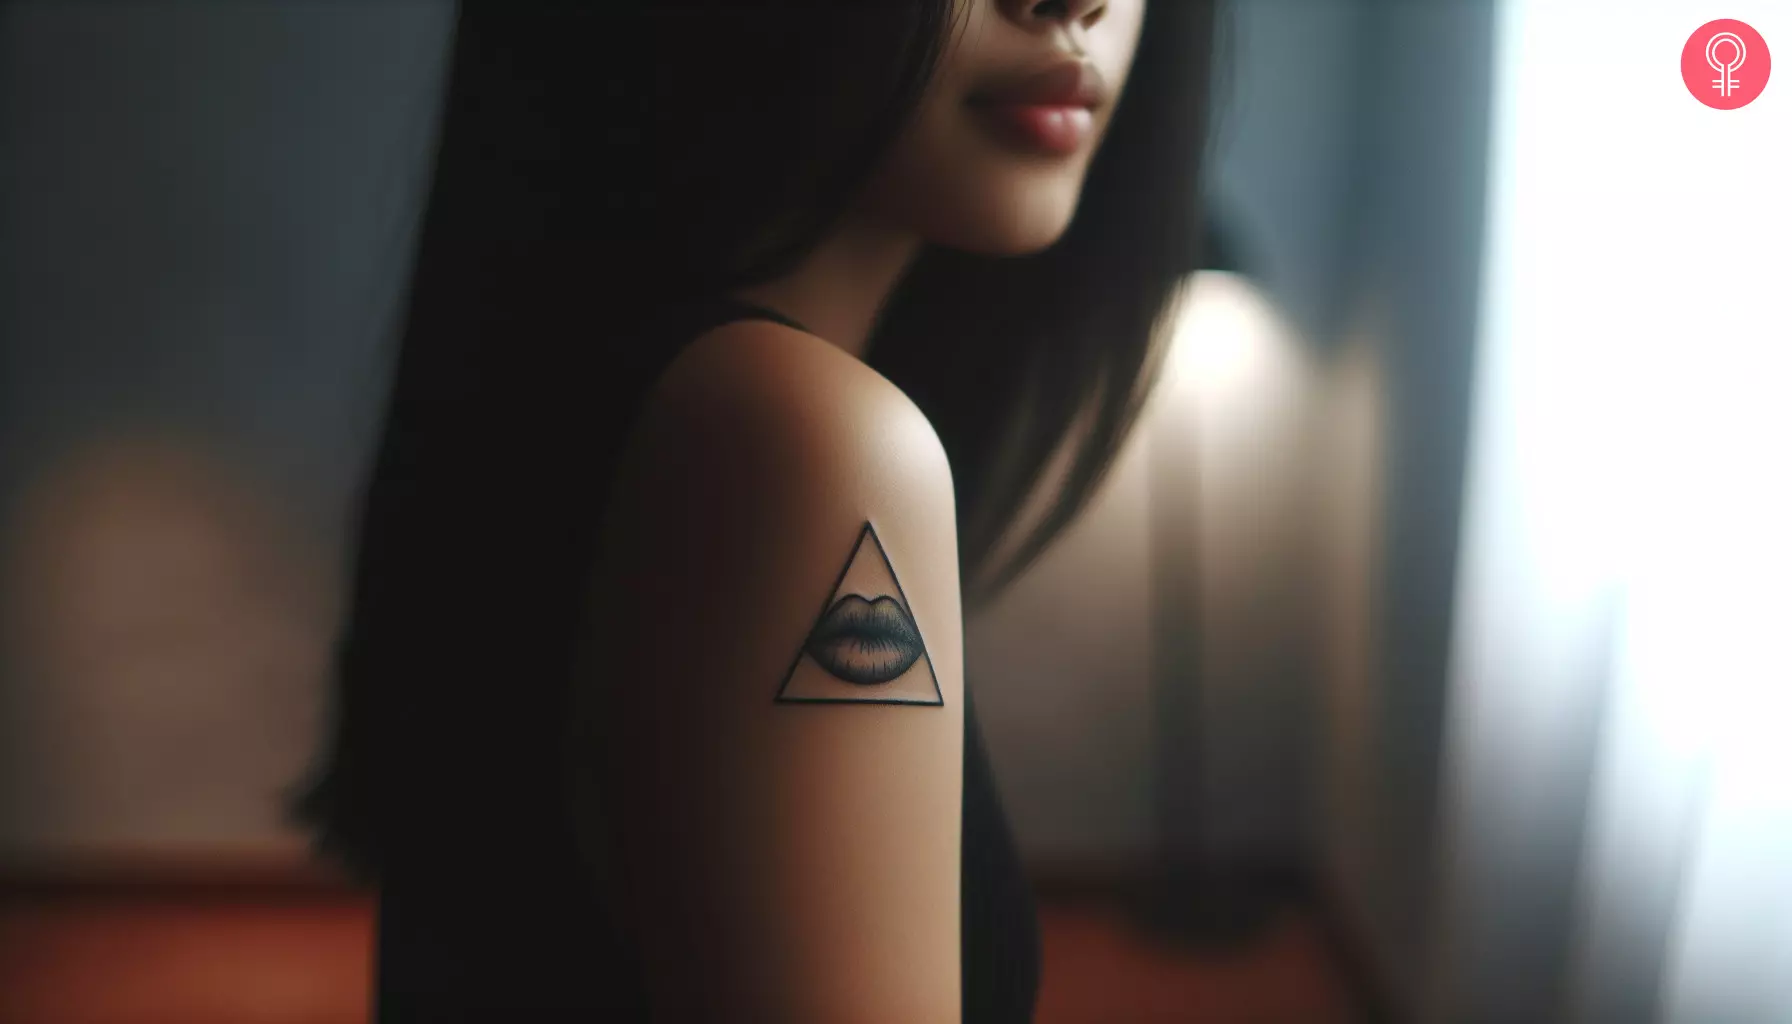 A woman with a lips triangle tattoo on her upper arm